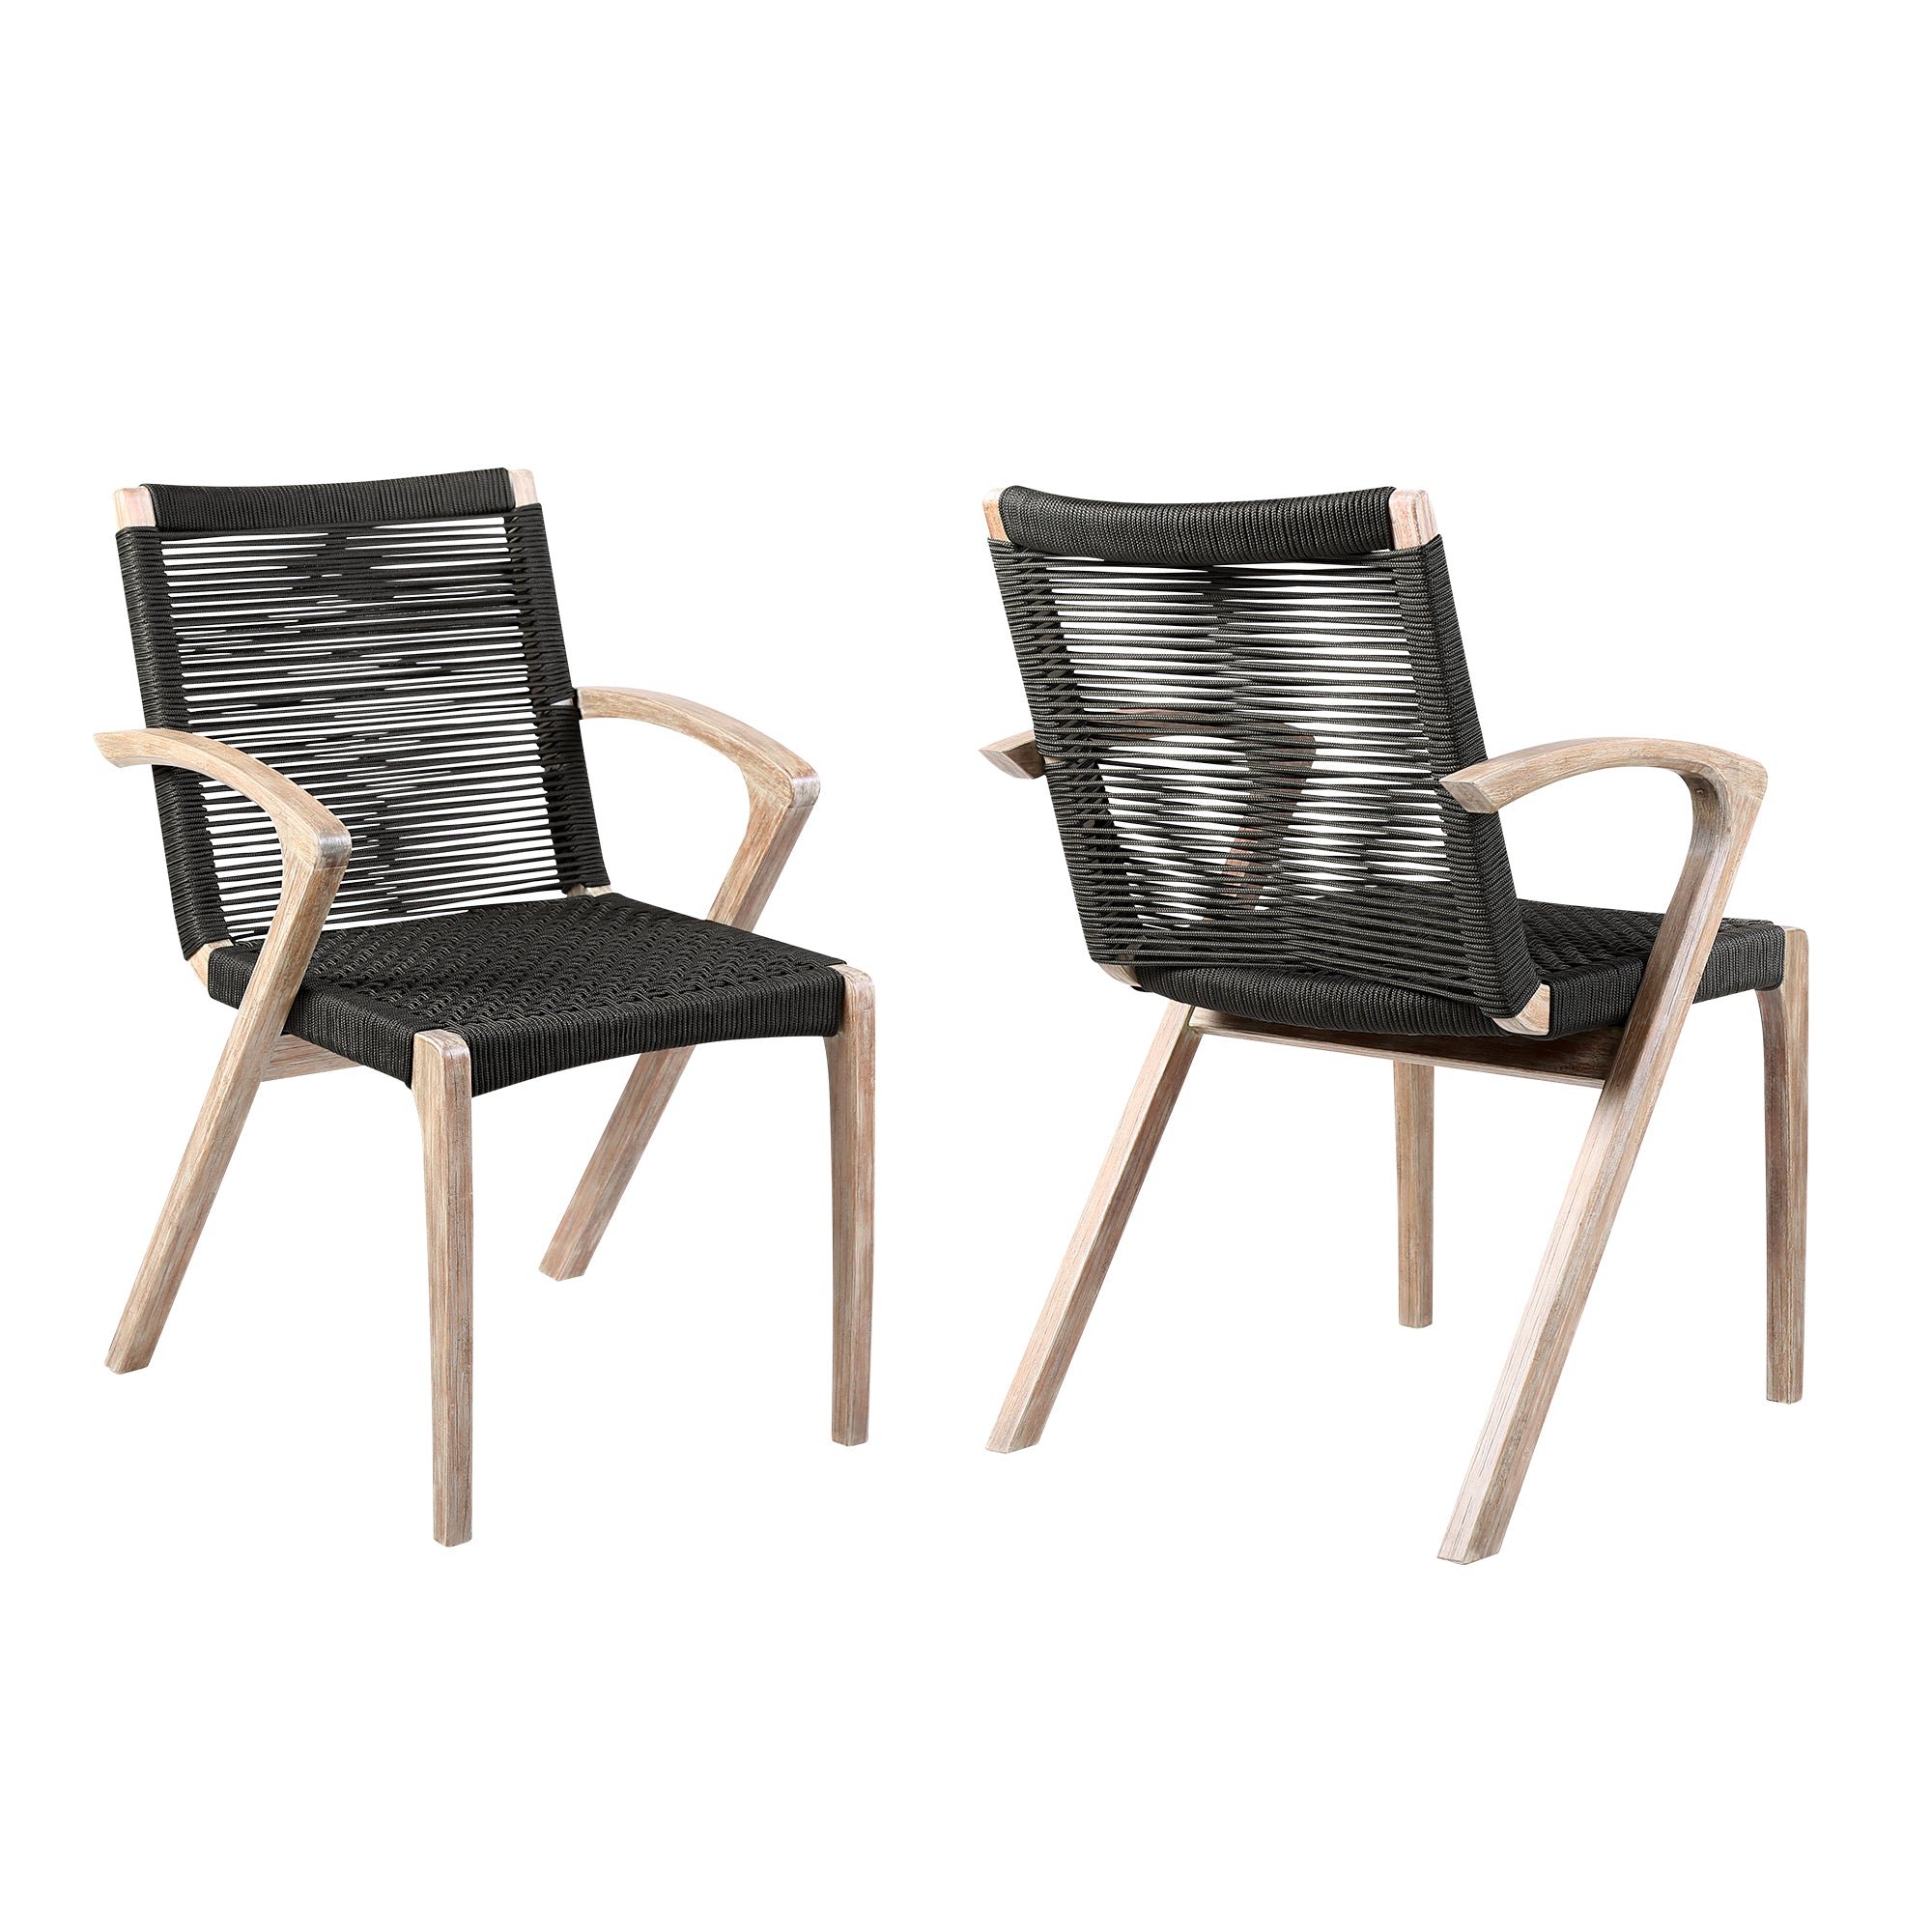 Armen Living - Nabila Outdoor Light Eucalyptus Wood and Charcoal Rope Dining Chairs - Set of 2 - 840254333413